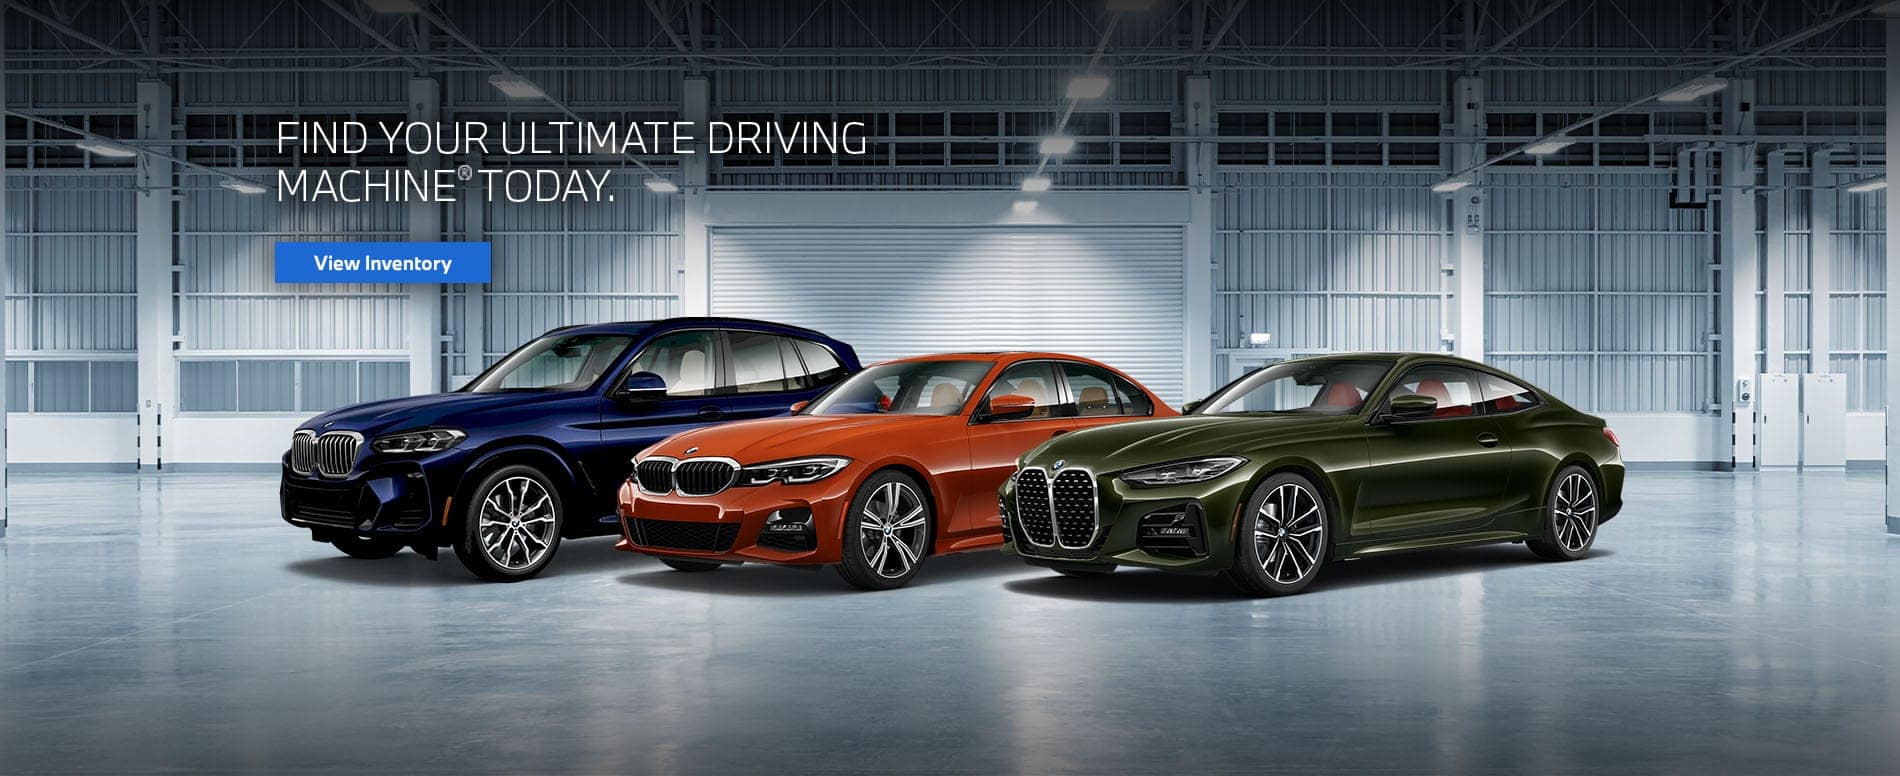 Blue X3, Orange 3 series, green 4 series coupe lined up in garage.